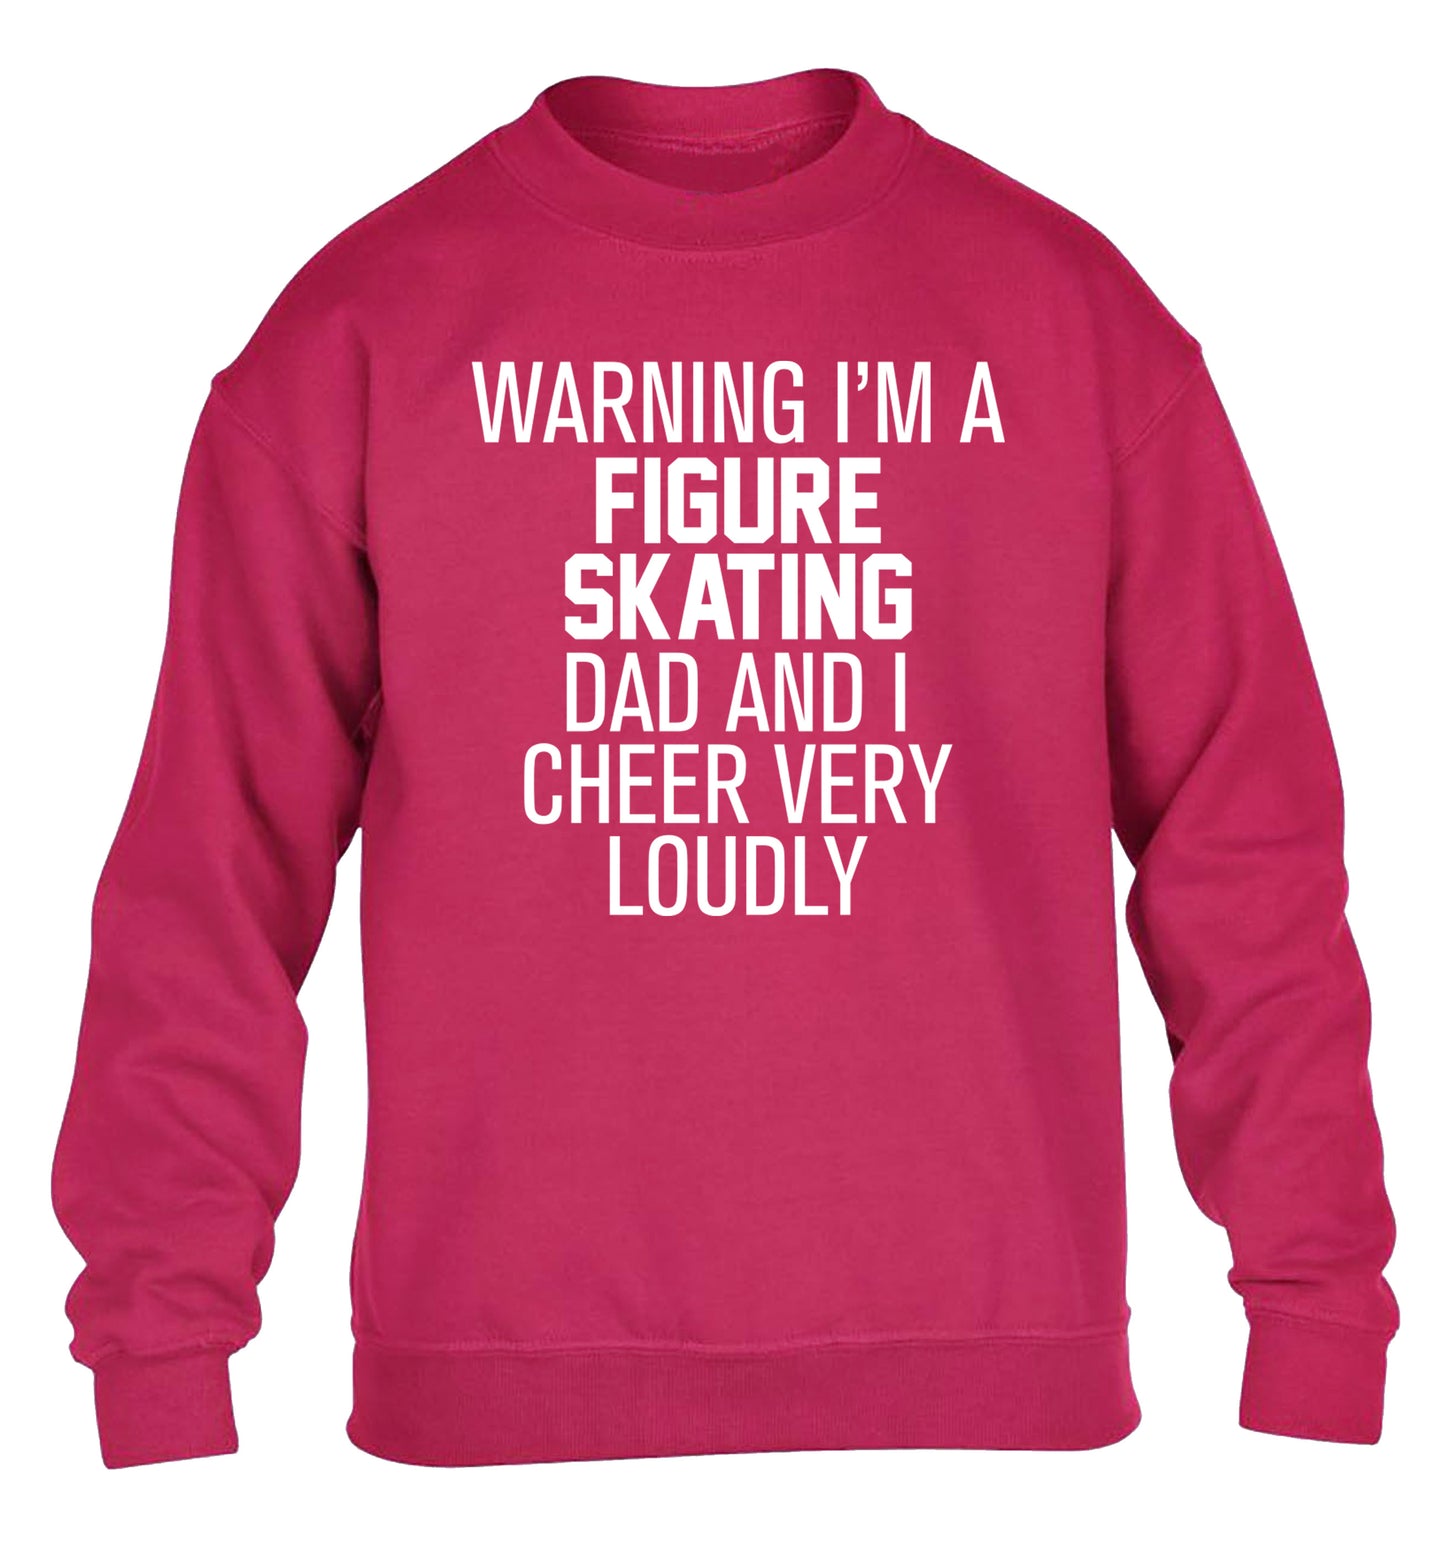 Warning I'm a figure skating dad and I cheer very loudly children's pink sweater 12-14 Years